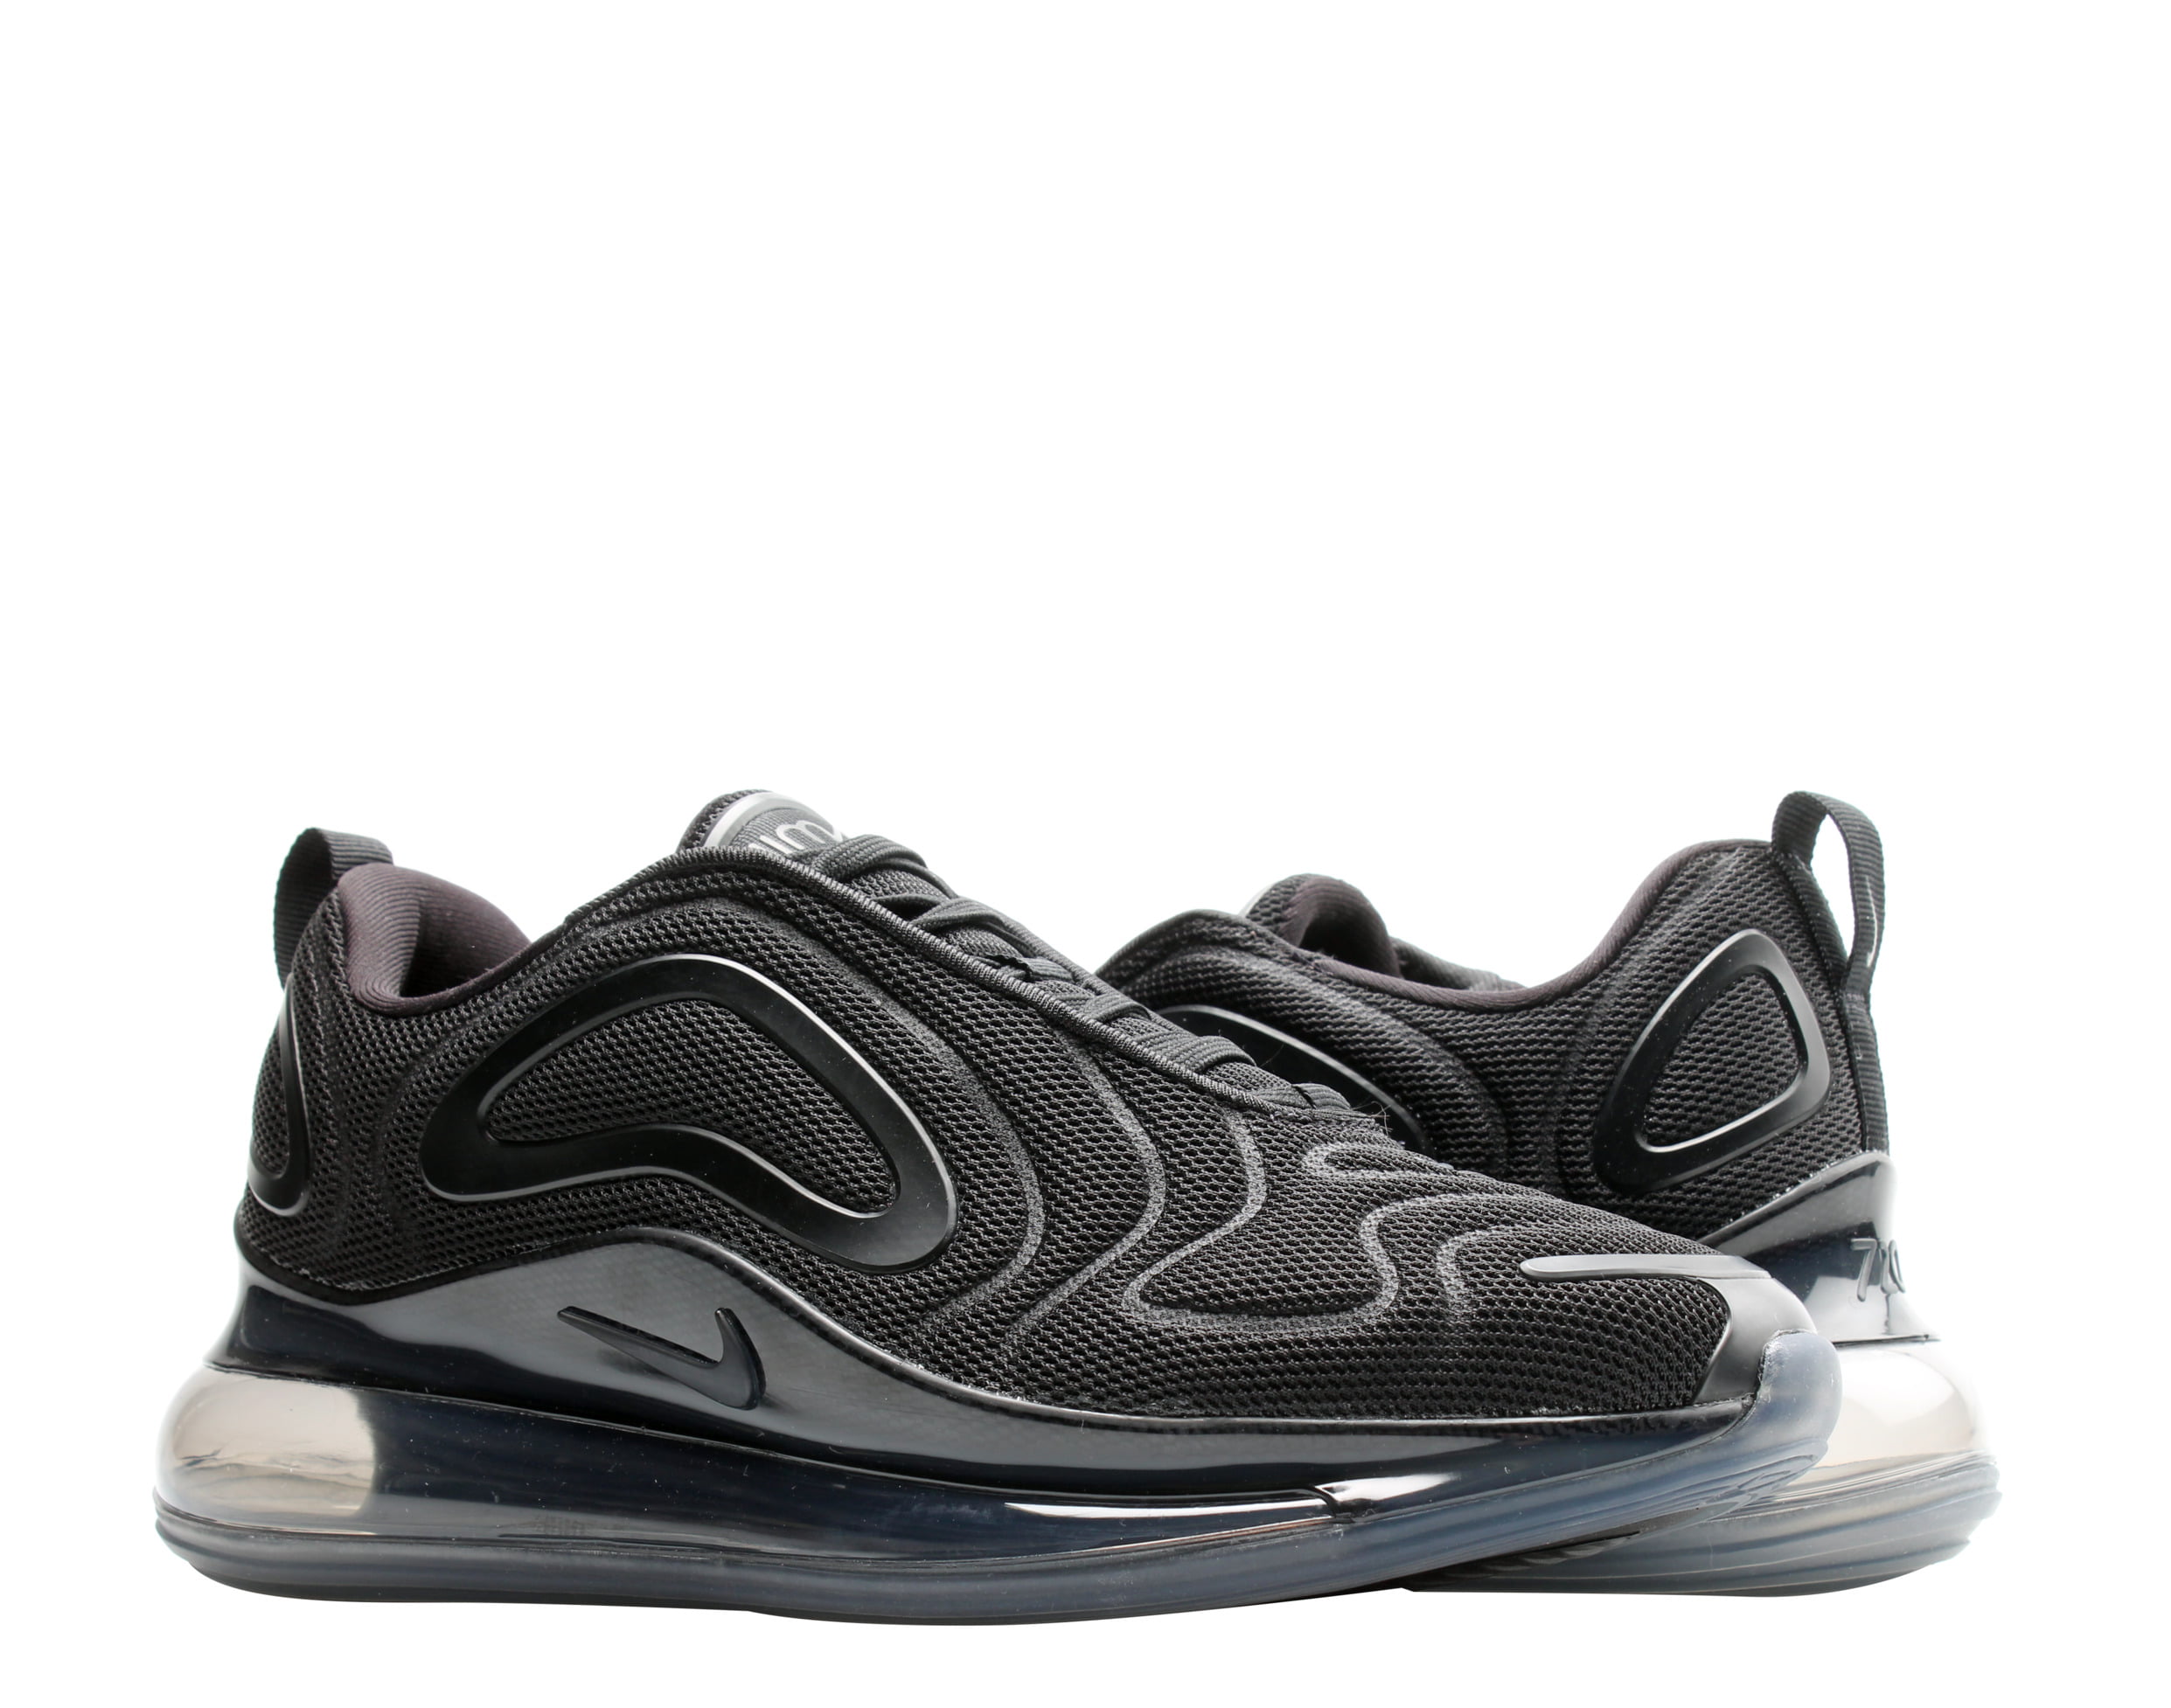 Vest Ray Against the will Nike Air Max 720 Triple Black/Anthracite Women's Running Shoes AR9293-007 -  Walmart.com